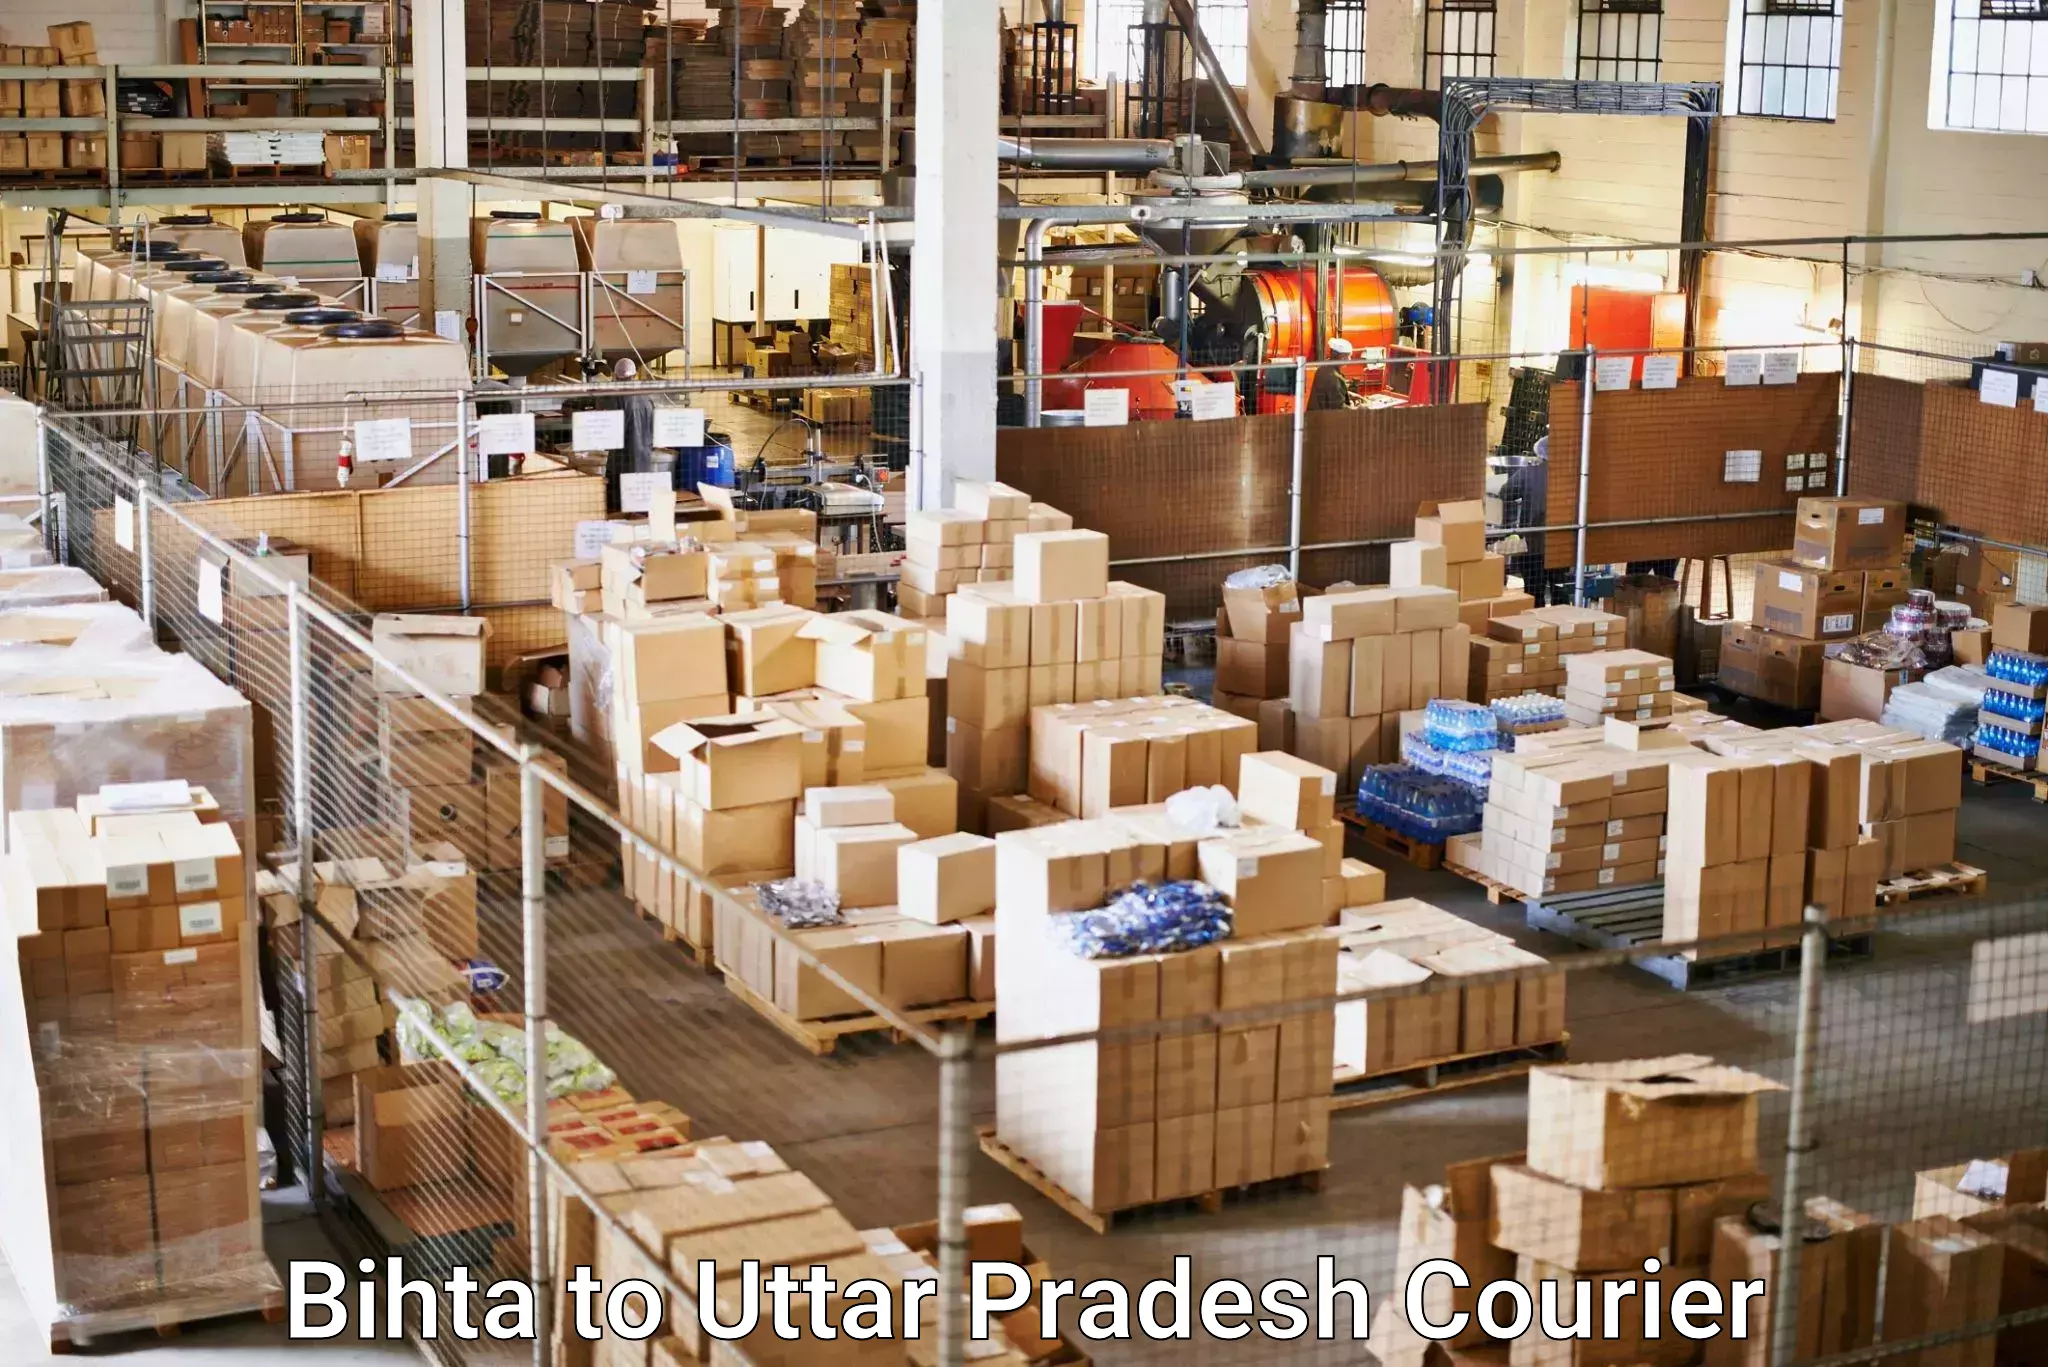 Parcel service for businesses Bihta to Bijpur